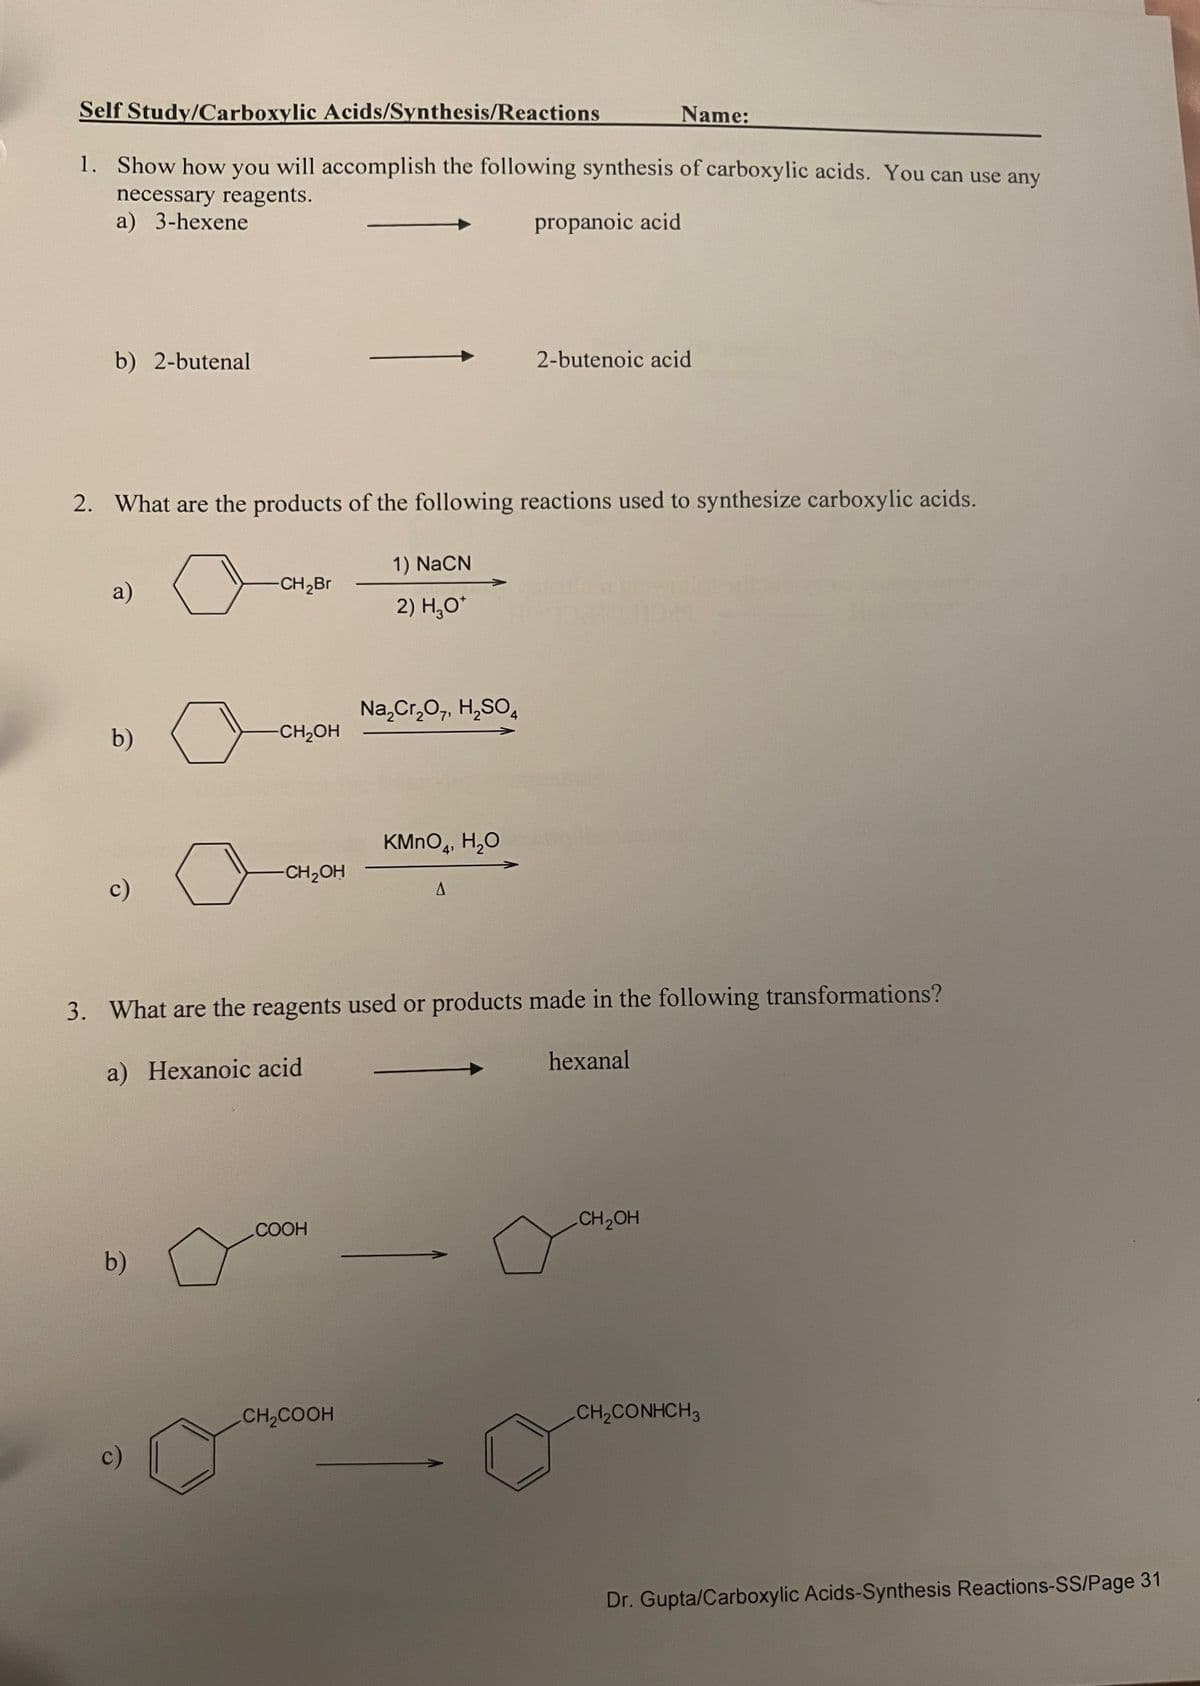 Self Study/Carboxylic Acids/Synthesis/Reactions
Name:
1. Show how you will accomplish the following synthesis of carboxylic acids. You can use any
necessary reagents.
a) 3-hexene
b) 2-butenal
propanoic acid
2-butenoic acid
2. What are the products of the following reactions used to synthesize carboxylic acids.
a)
1) NaCN
CH2Br
2) H₂O*
Na2Cr2O7, H2SO4
b)
CH₂OH
KMnO4, H₂O
-CH2OH
c)
A
3. What are the reagents used or products made in the following transformations?
a) Hexanoic acid
hexanal
CH2OH
COOH
b)
CH2COOH
CH2CONHCH 3
c)
Dr. Gupta/Carboxylic Acids-Synthesis Reactions-SS/Page 31